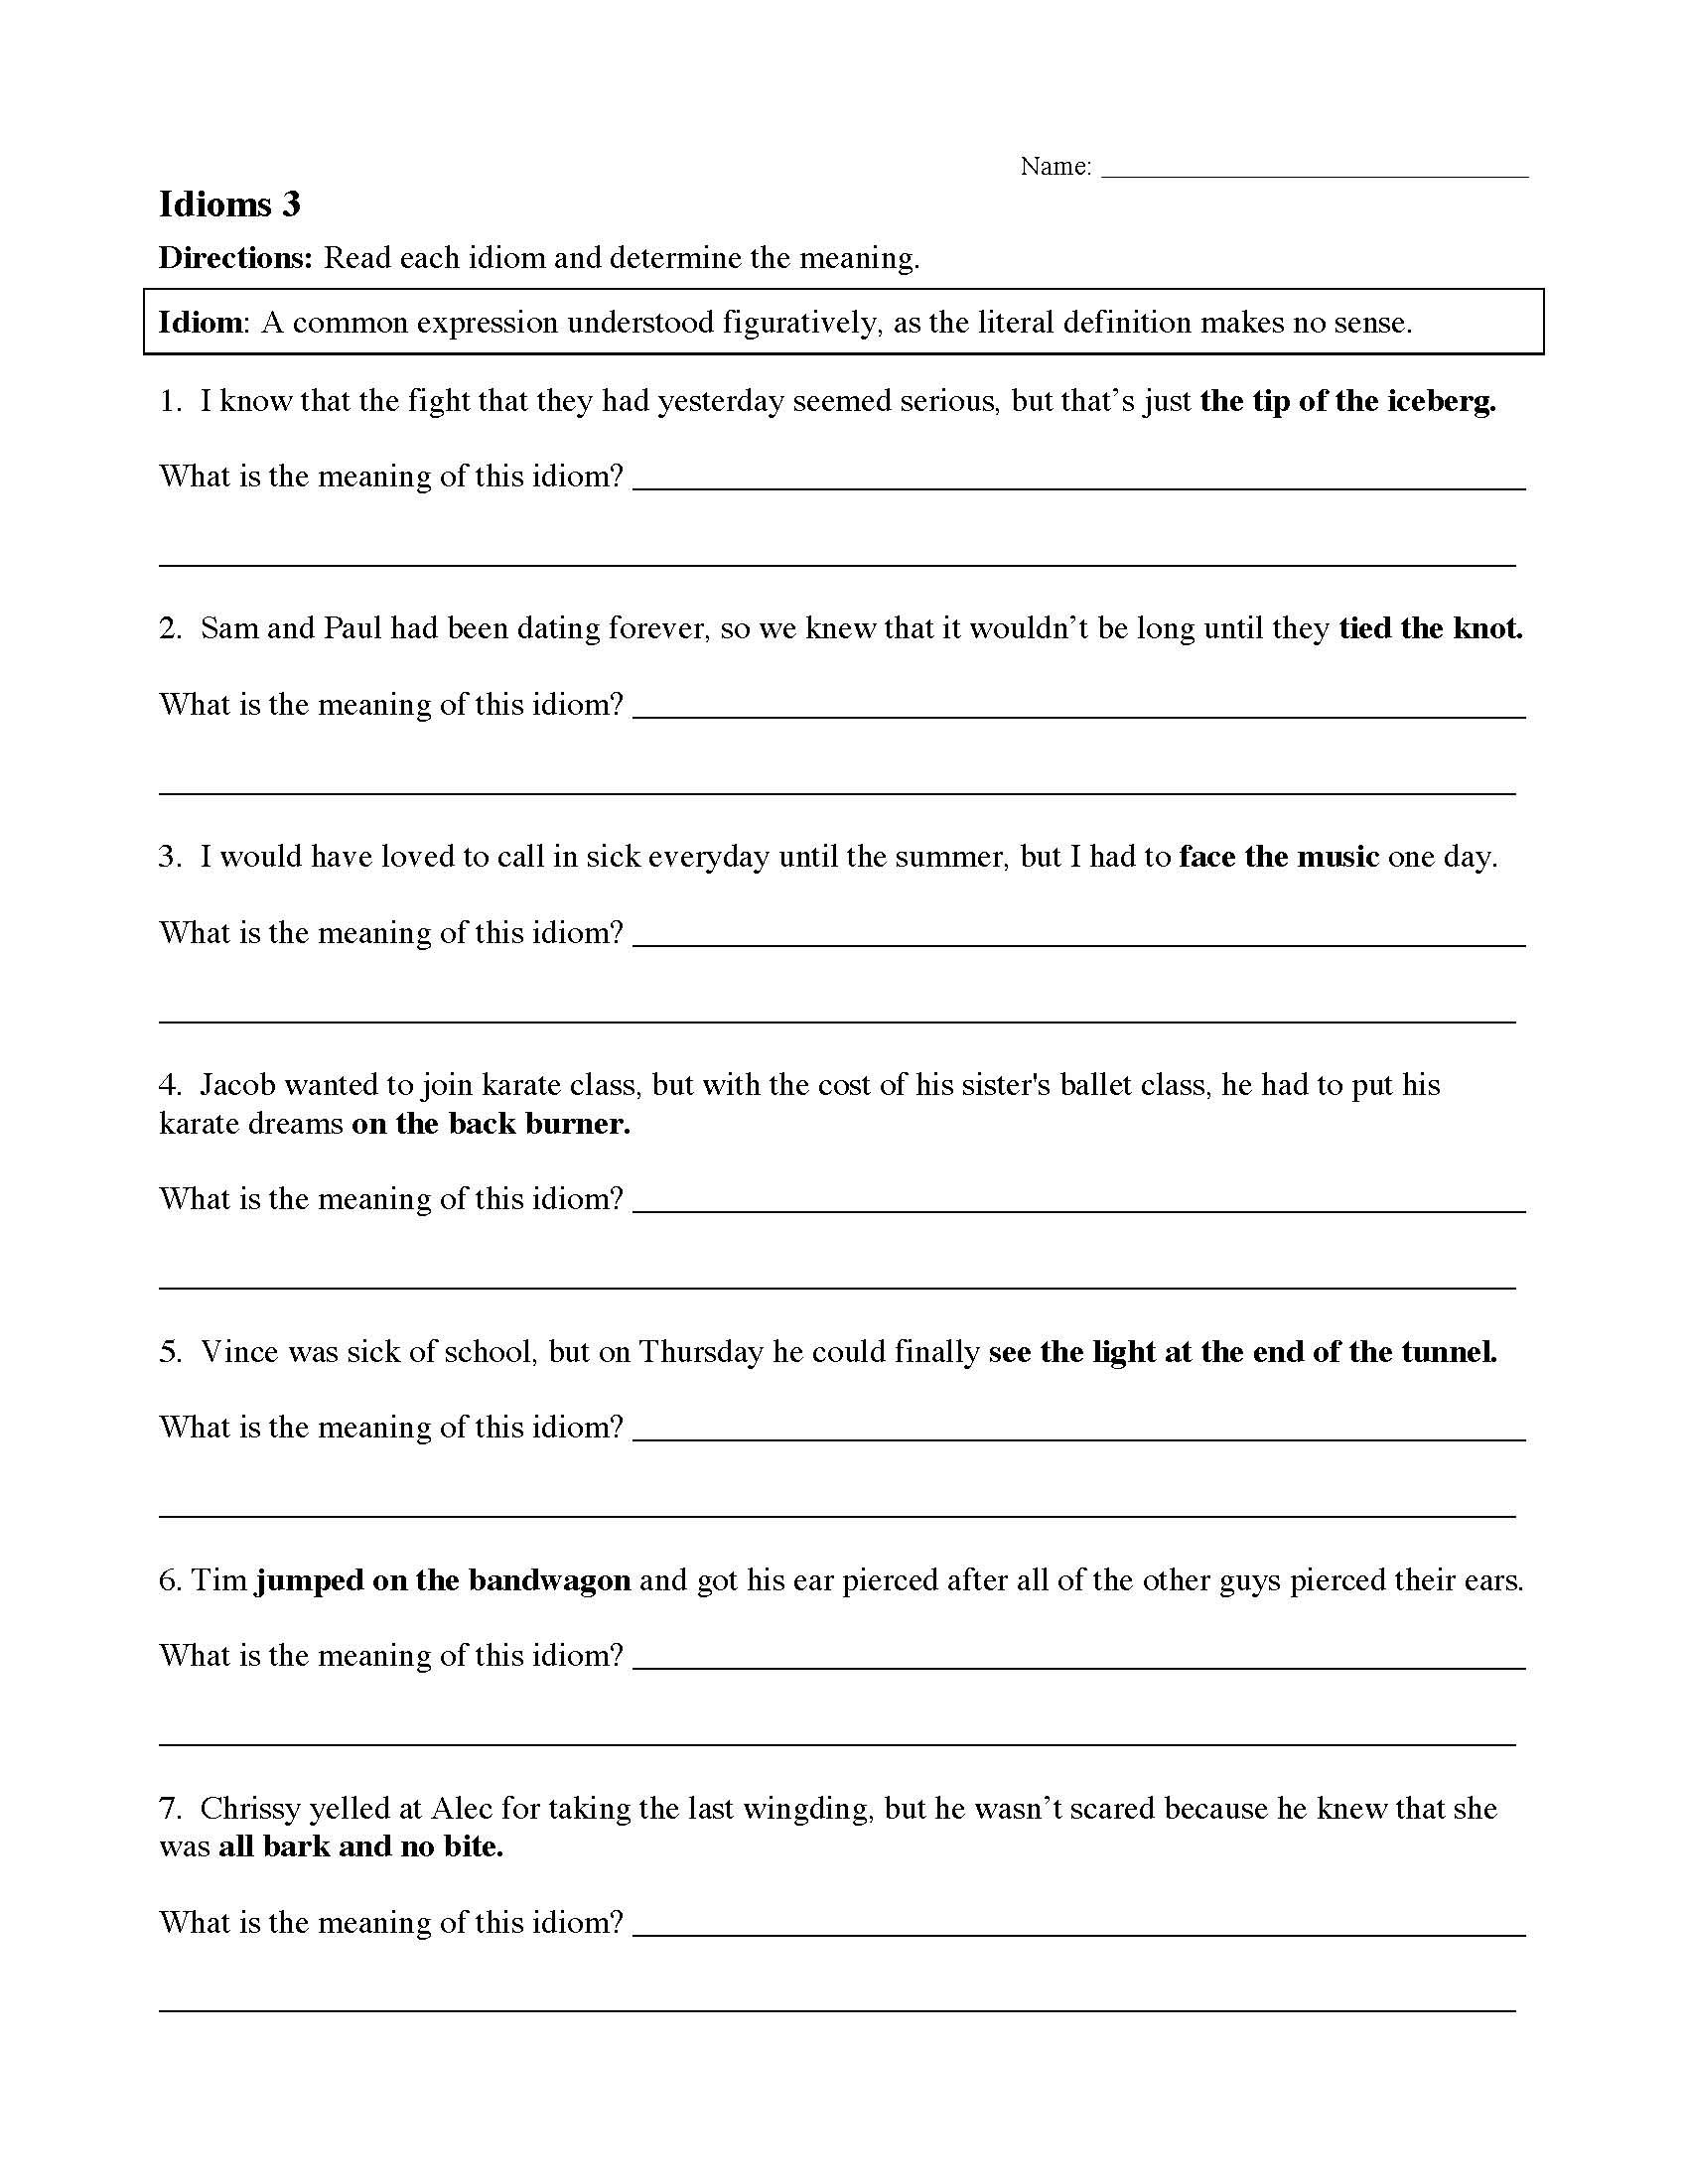 idioms-worksheet-6-answers